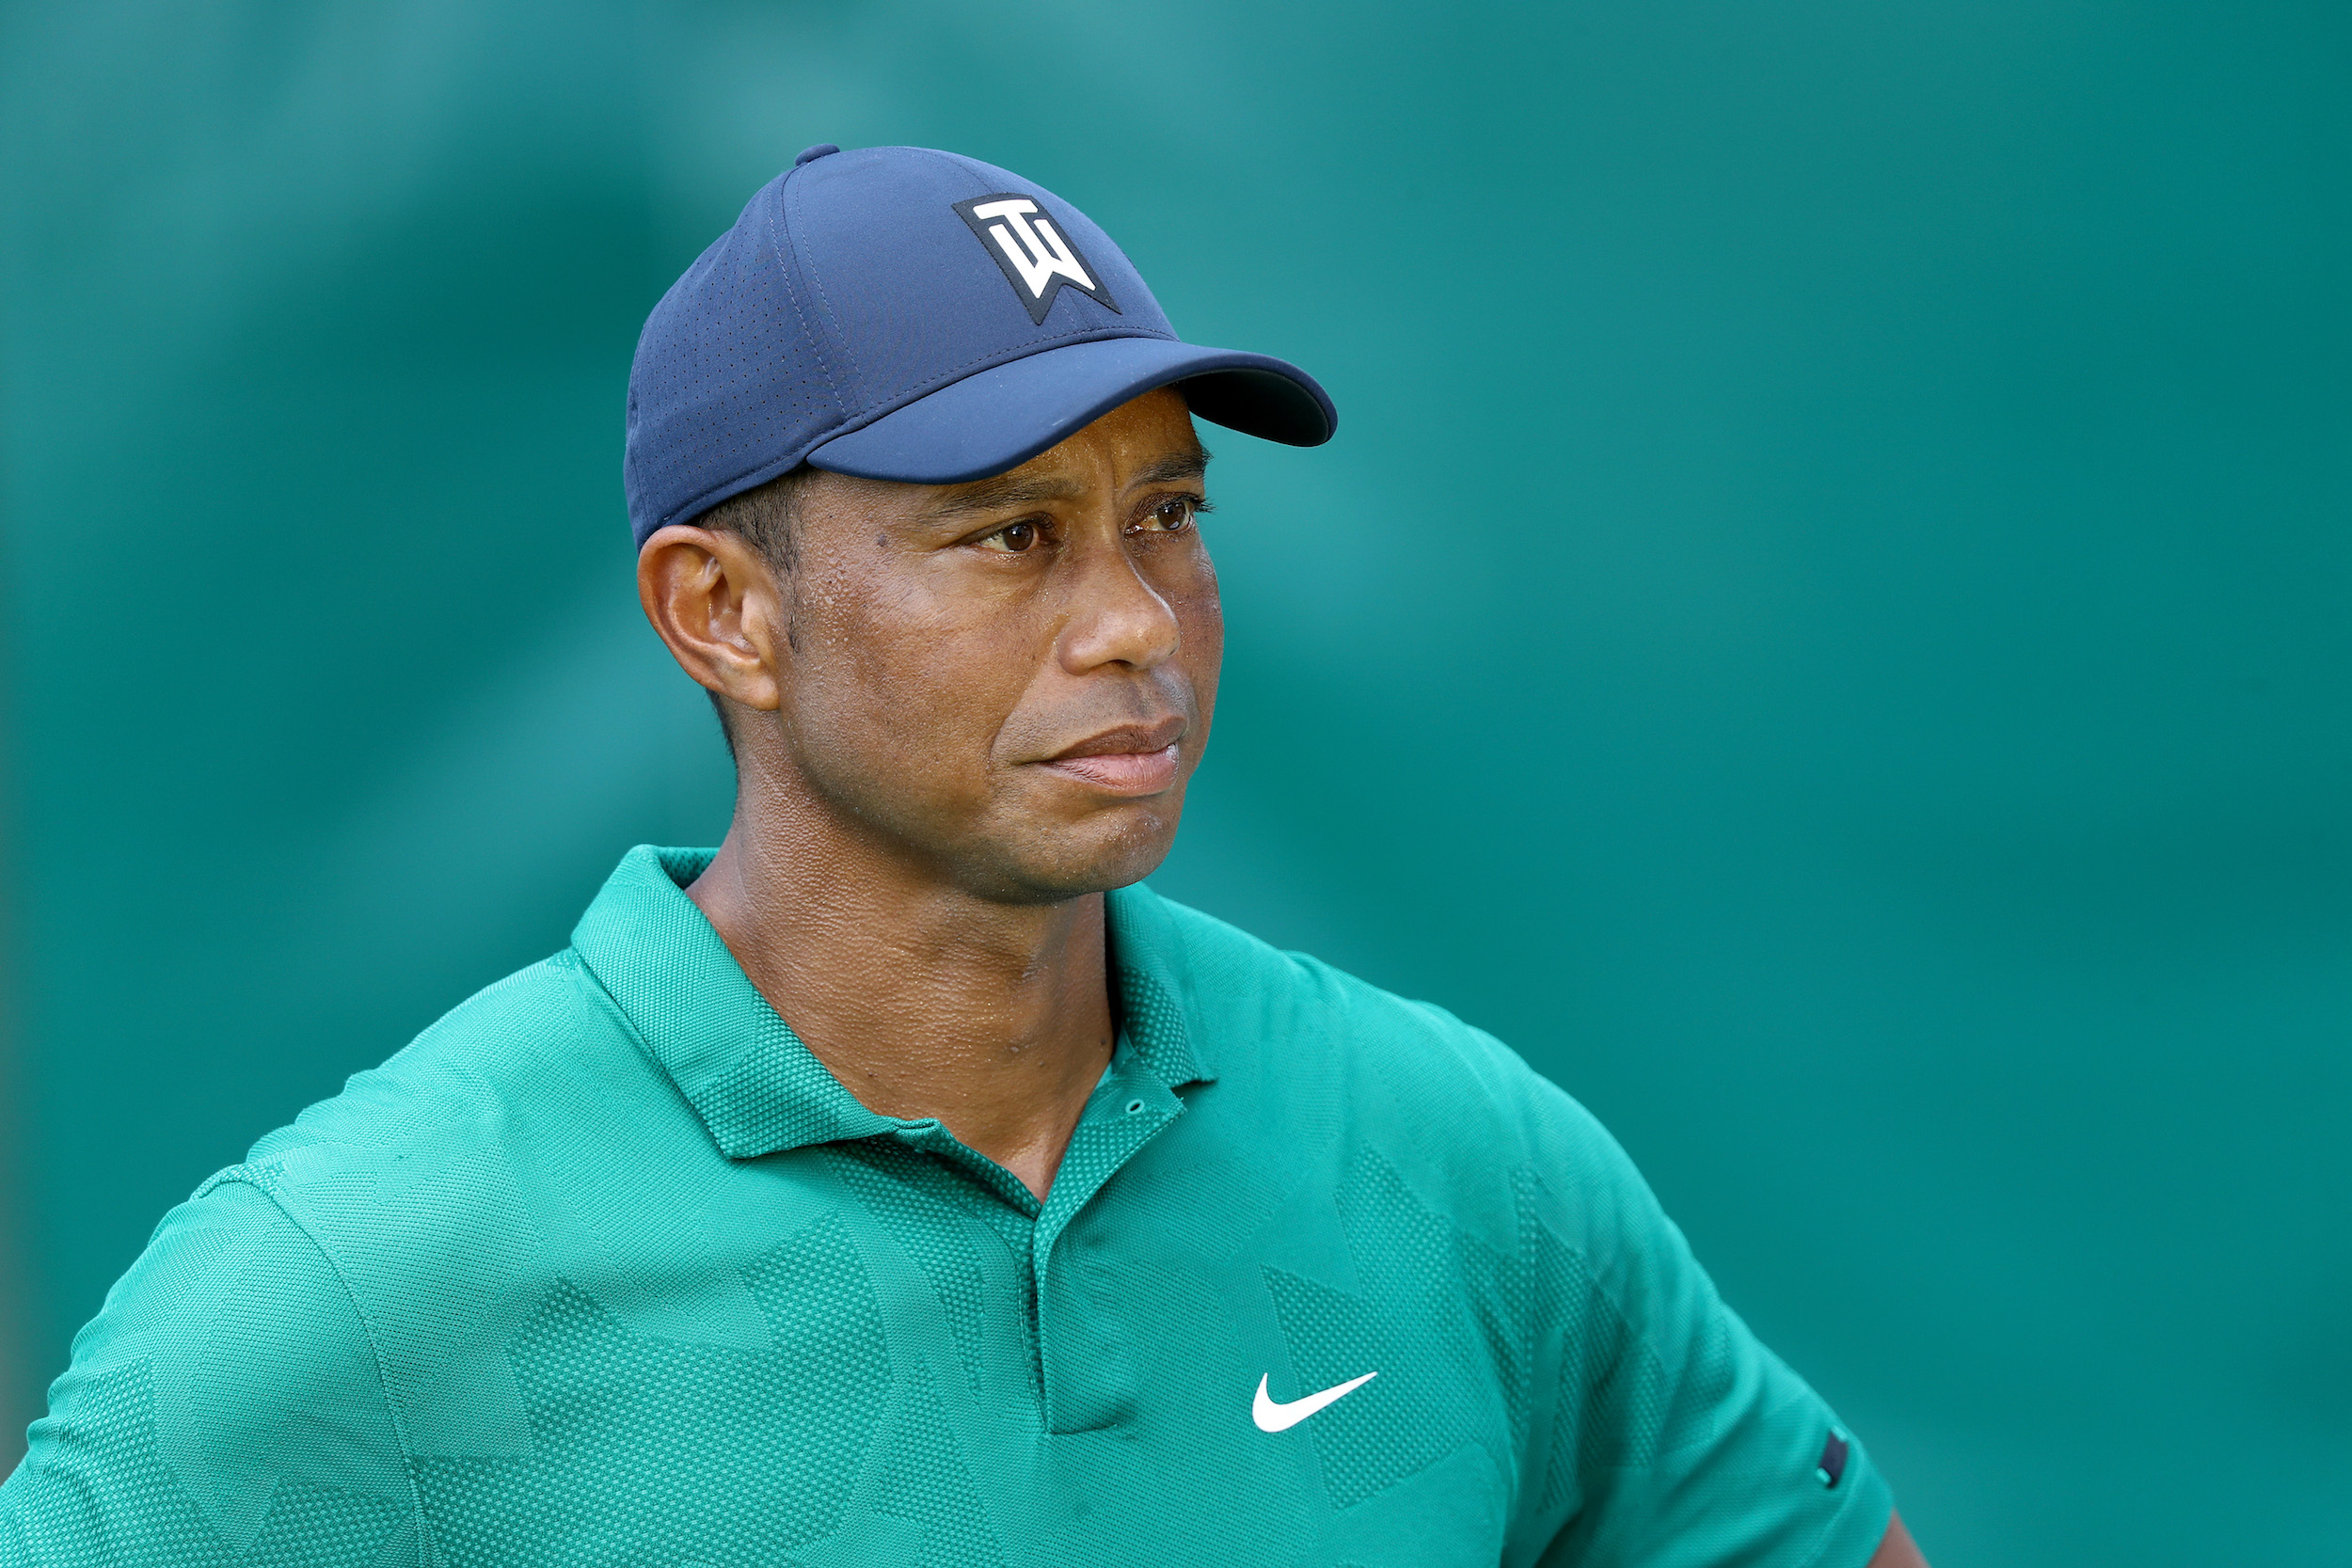 Tiger Woods has earned millions playing golf, but didn't treat some Navy SEALs to lunch.